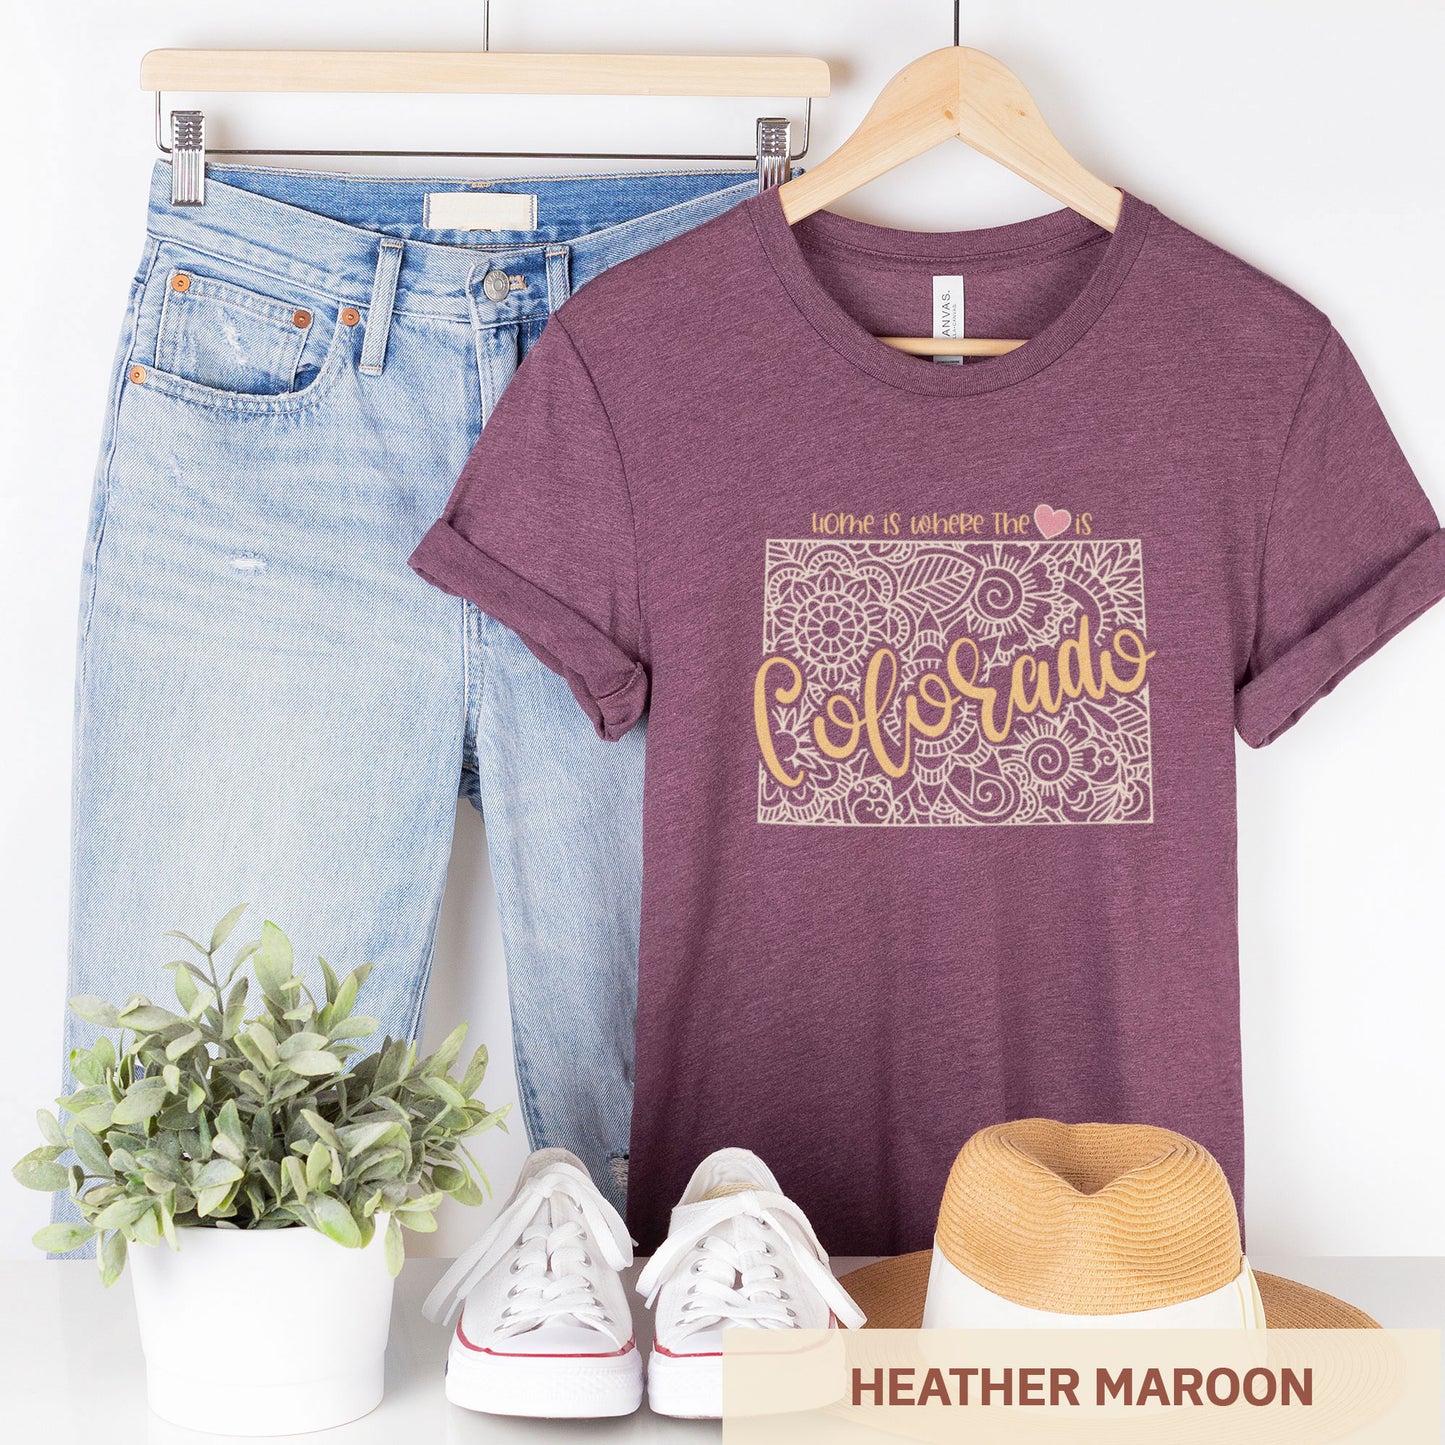  A hanging heather maroon Bella Canvas t-shirt featuring a mandala in the shape of Colorado with the words home is where the heart is.